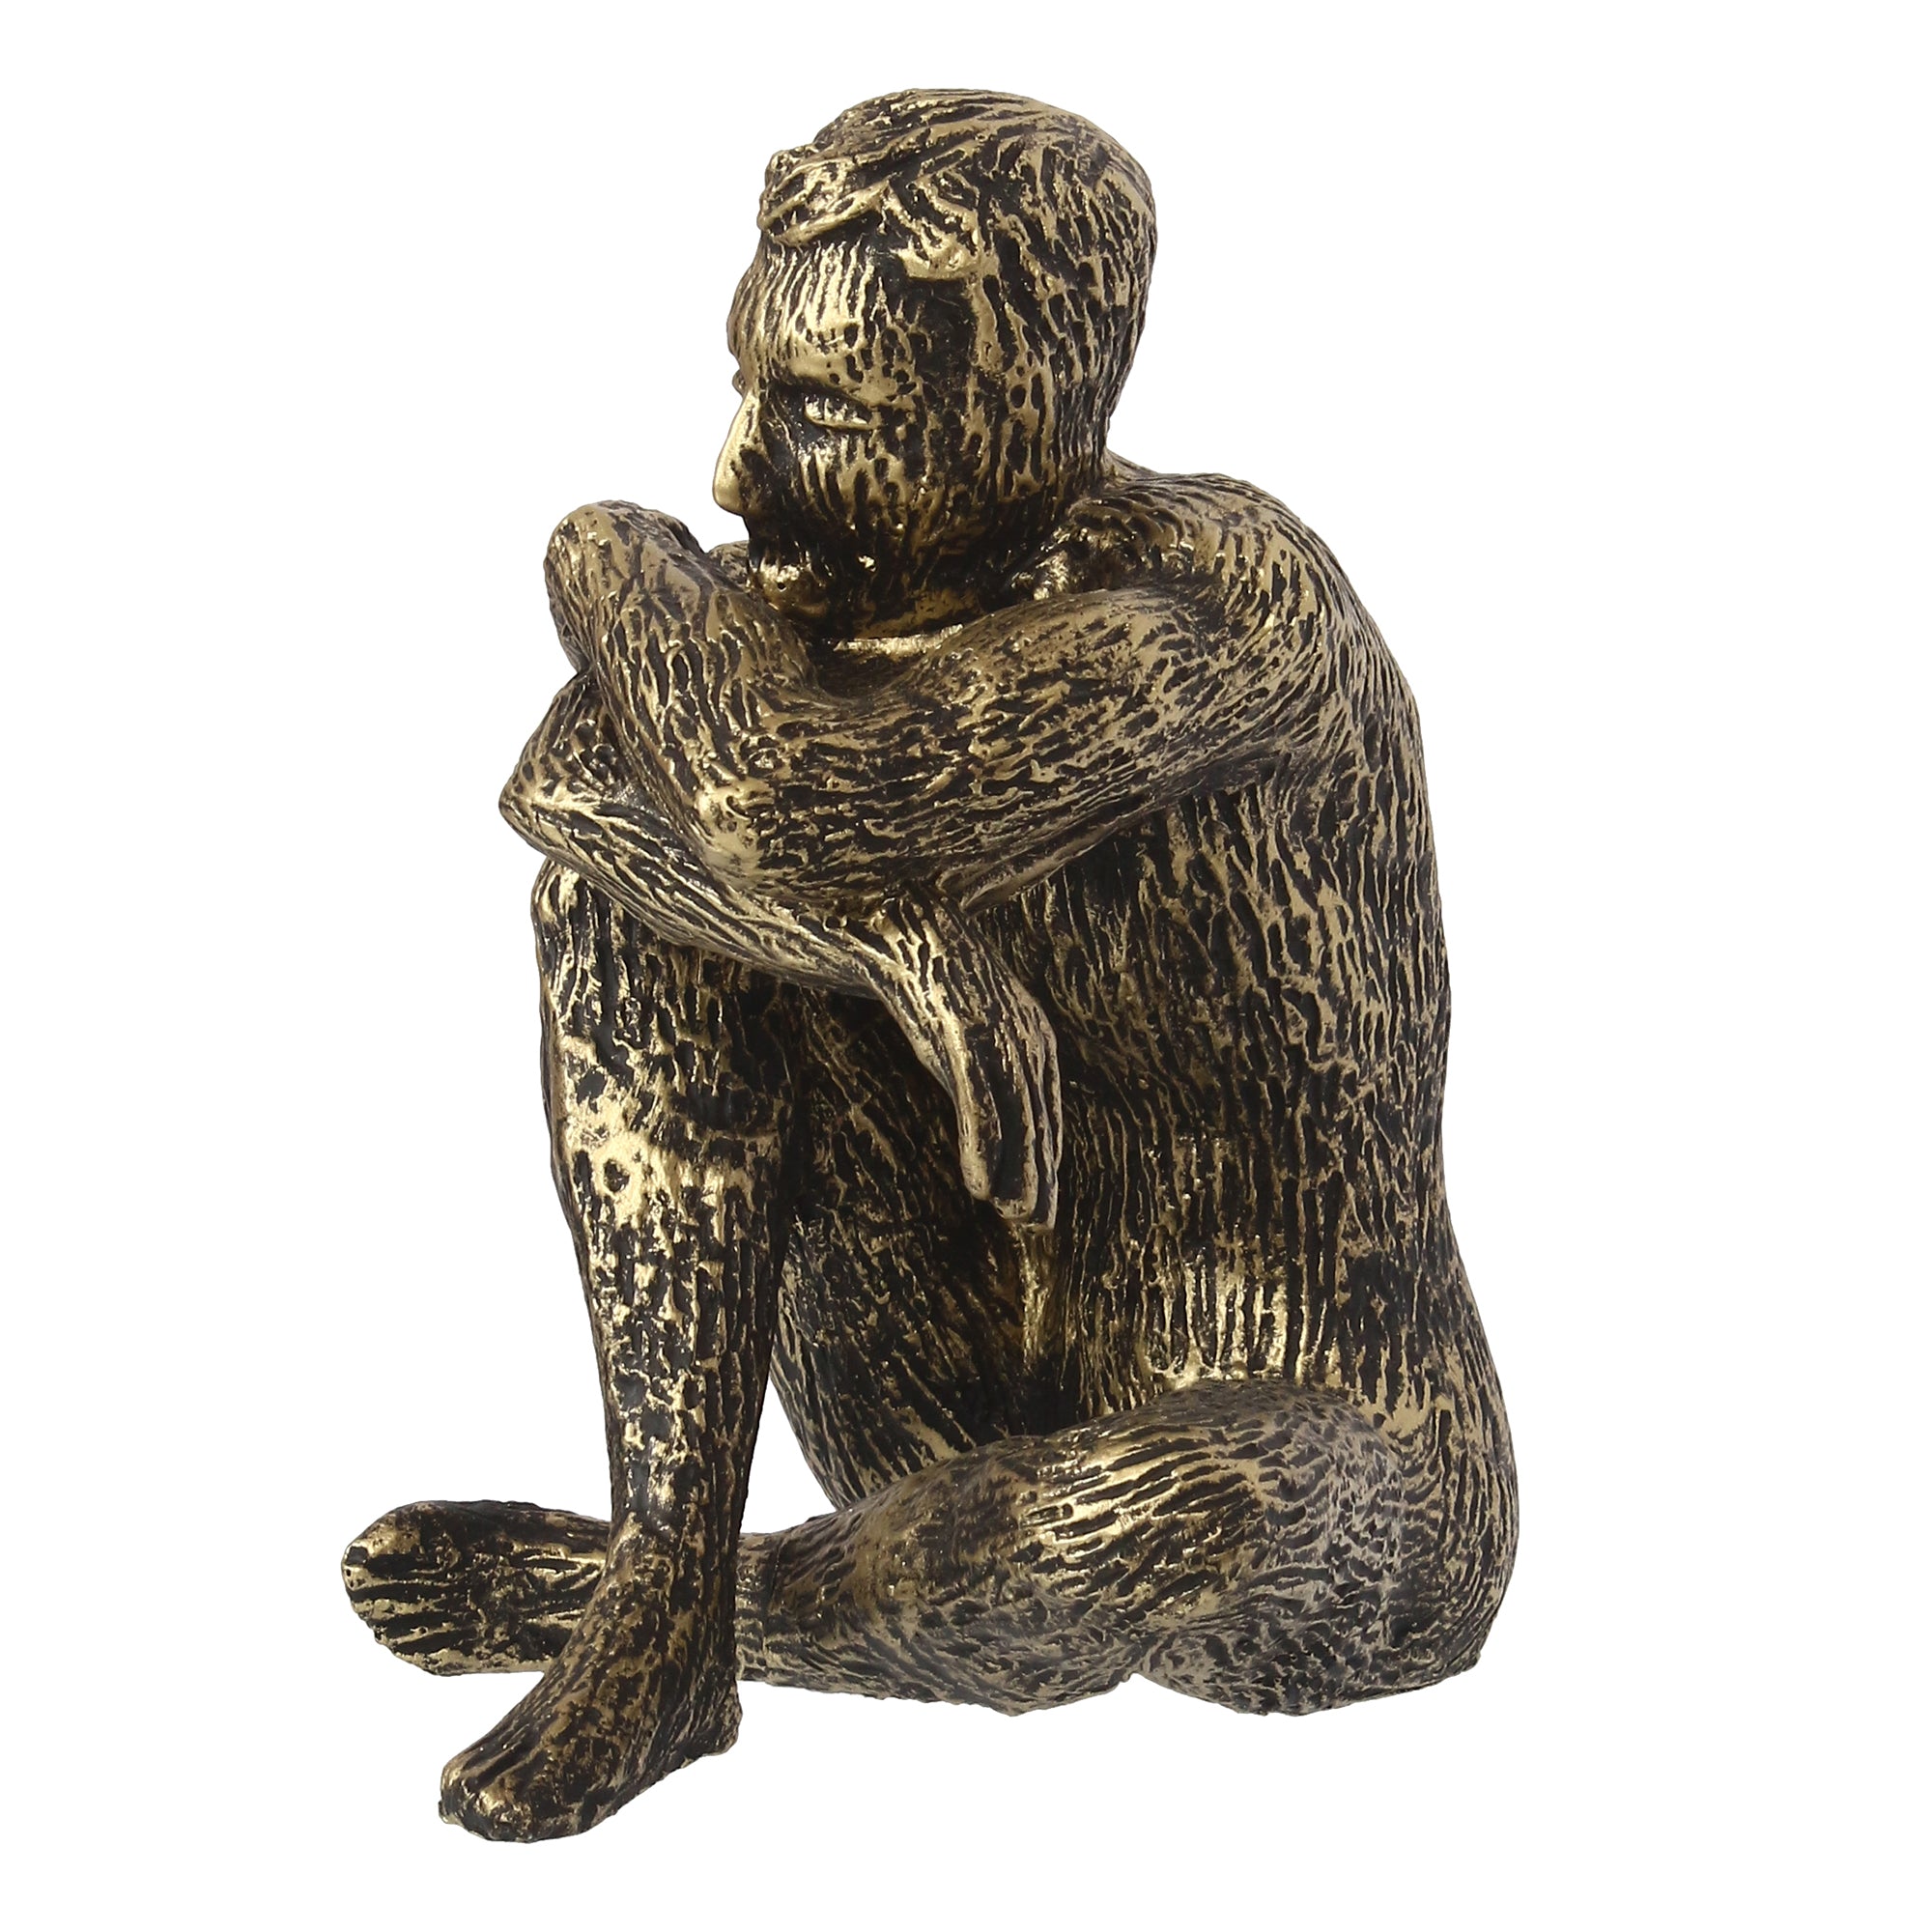 Golden and Black Polyresin Man Figurine Sitting in Thinking Position 4